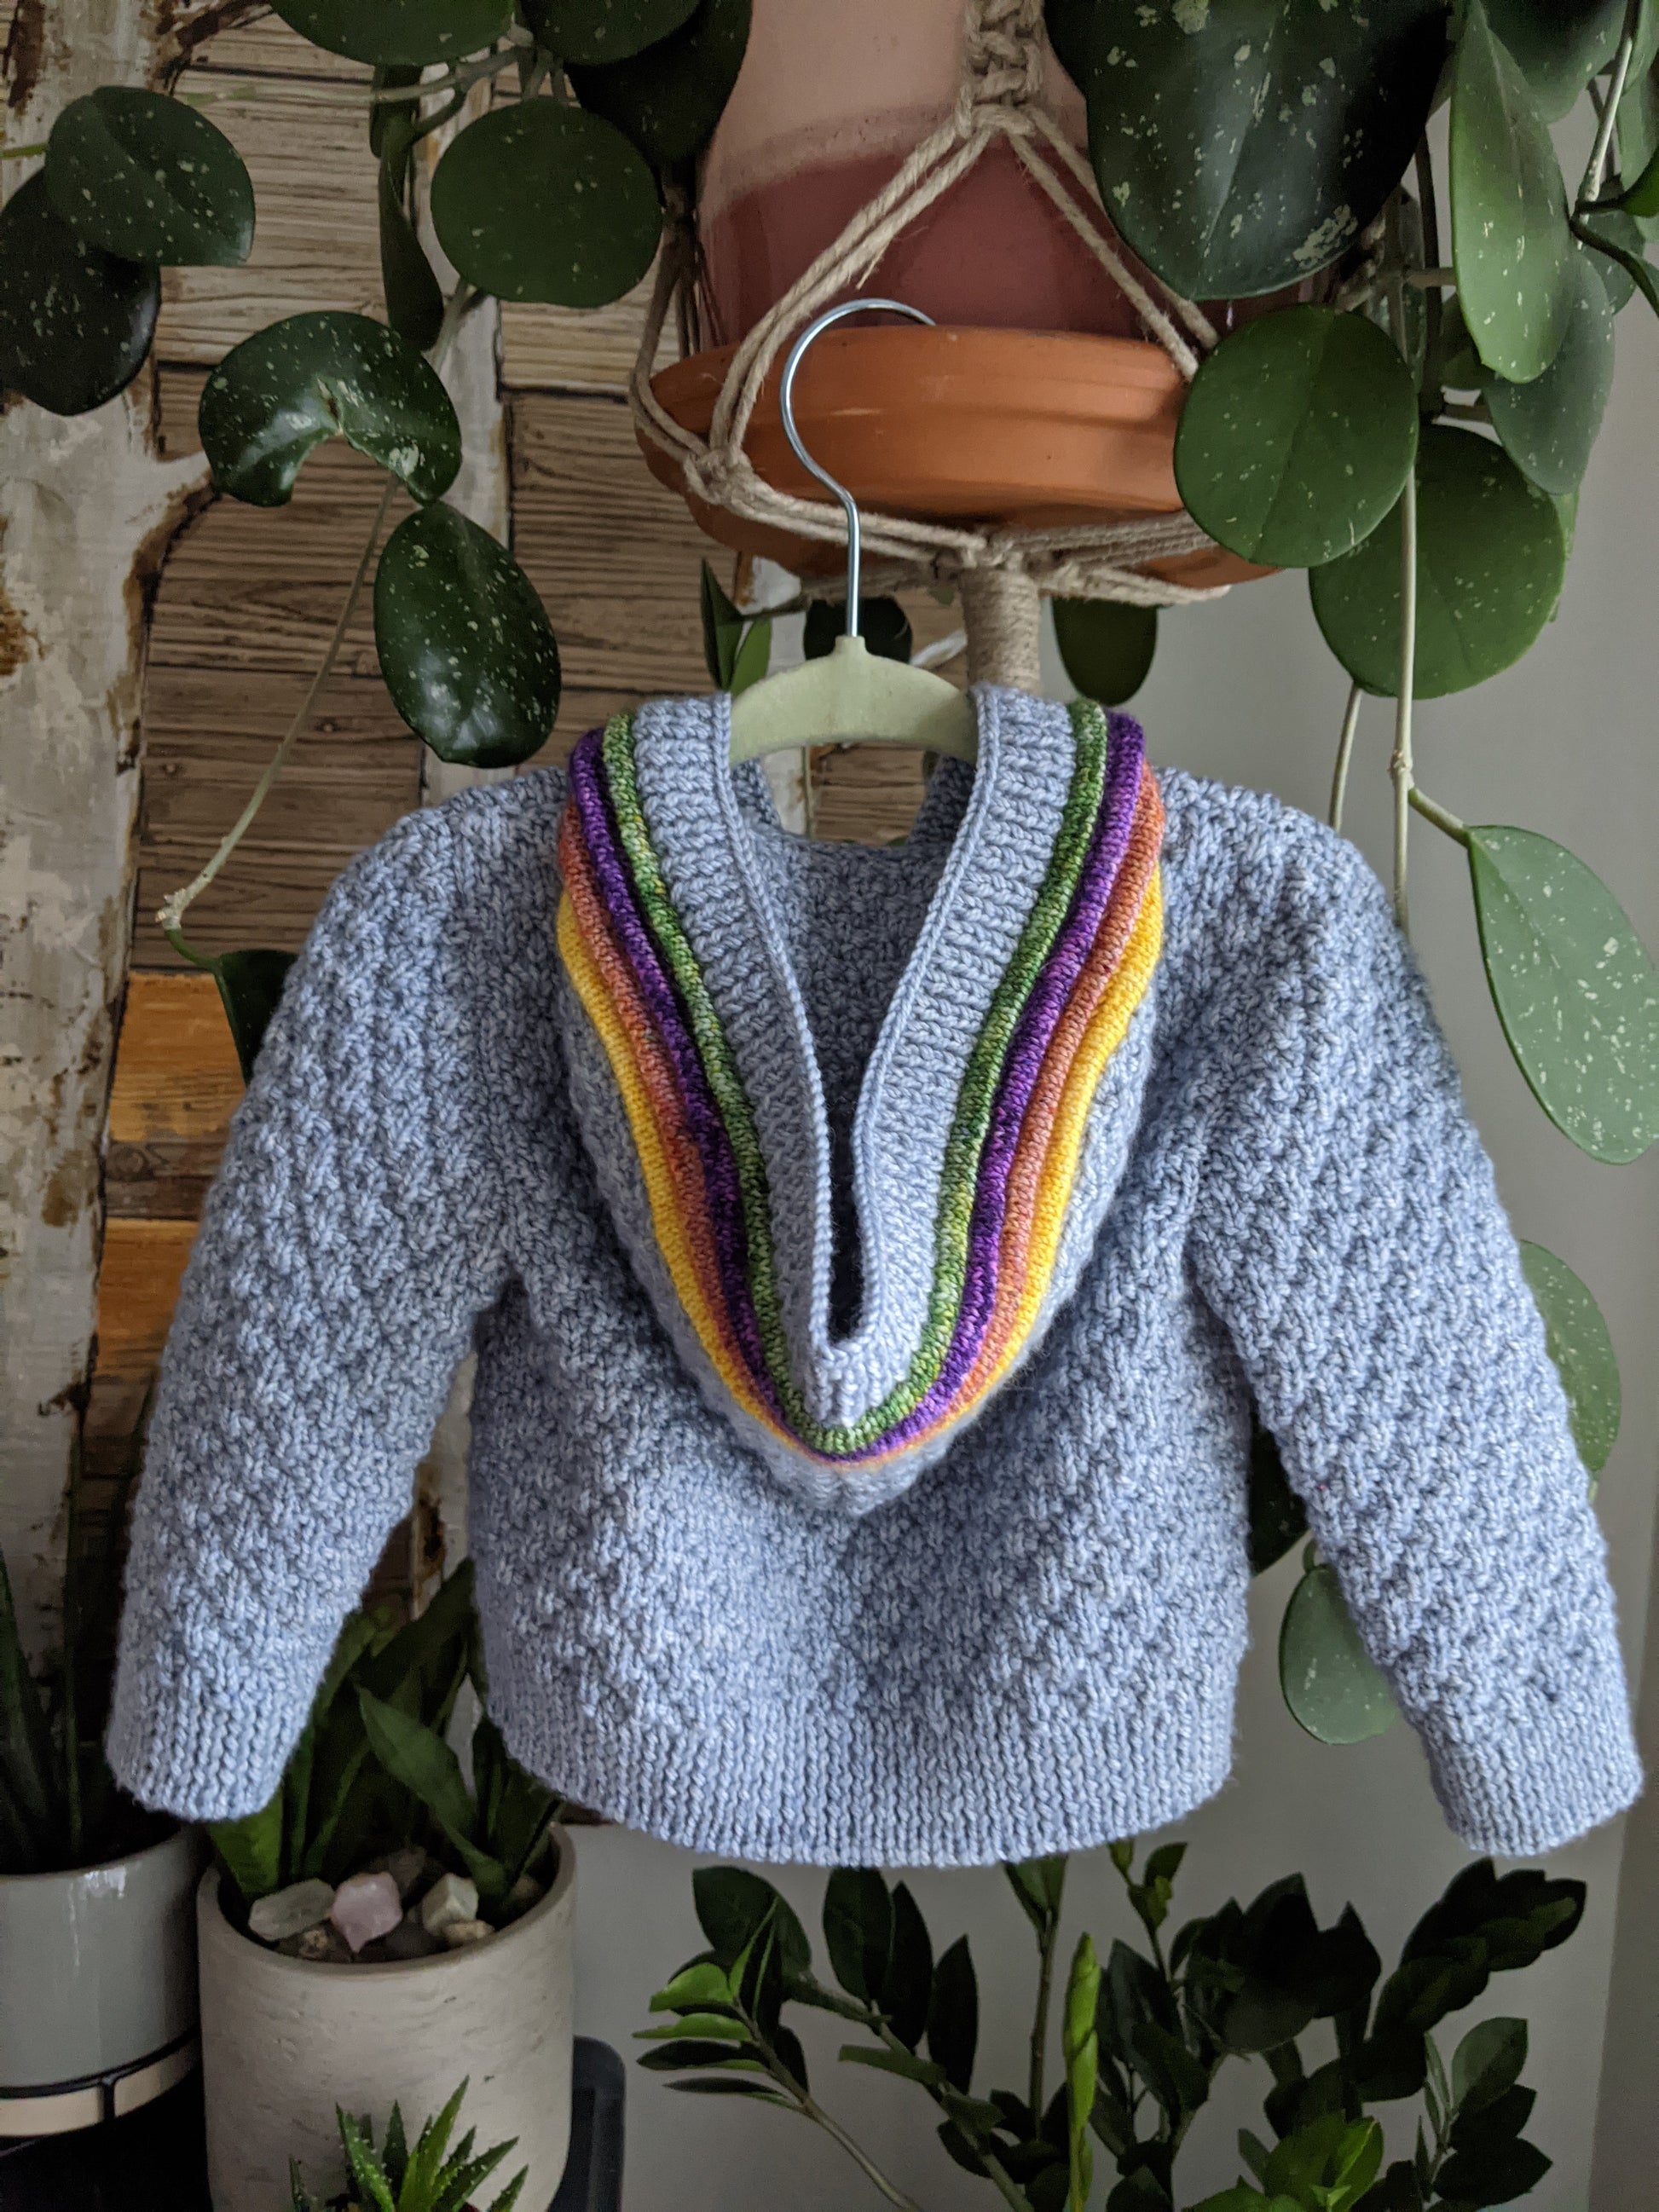 Seen from behind, a moss stitch kid's sweater hangs from the bottom of a hanging plant. It's made with blue yarn and orange, yellow, purple, and green plackets around the button band and up the hood.